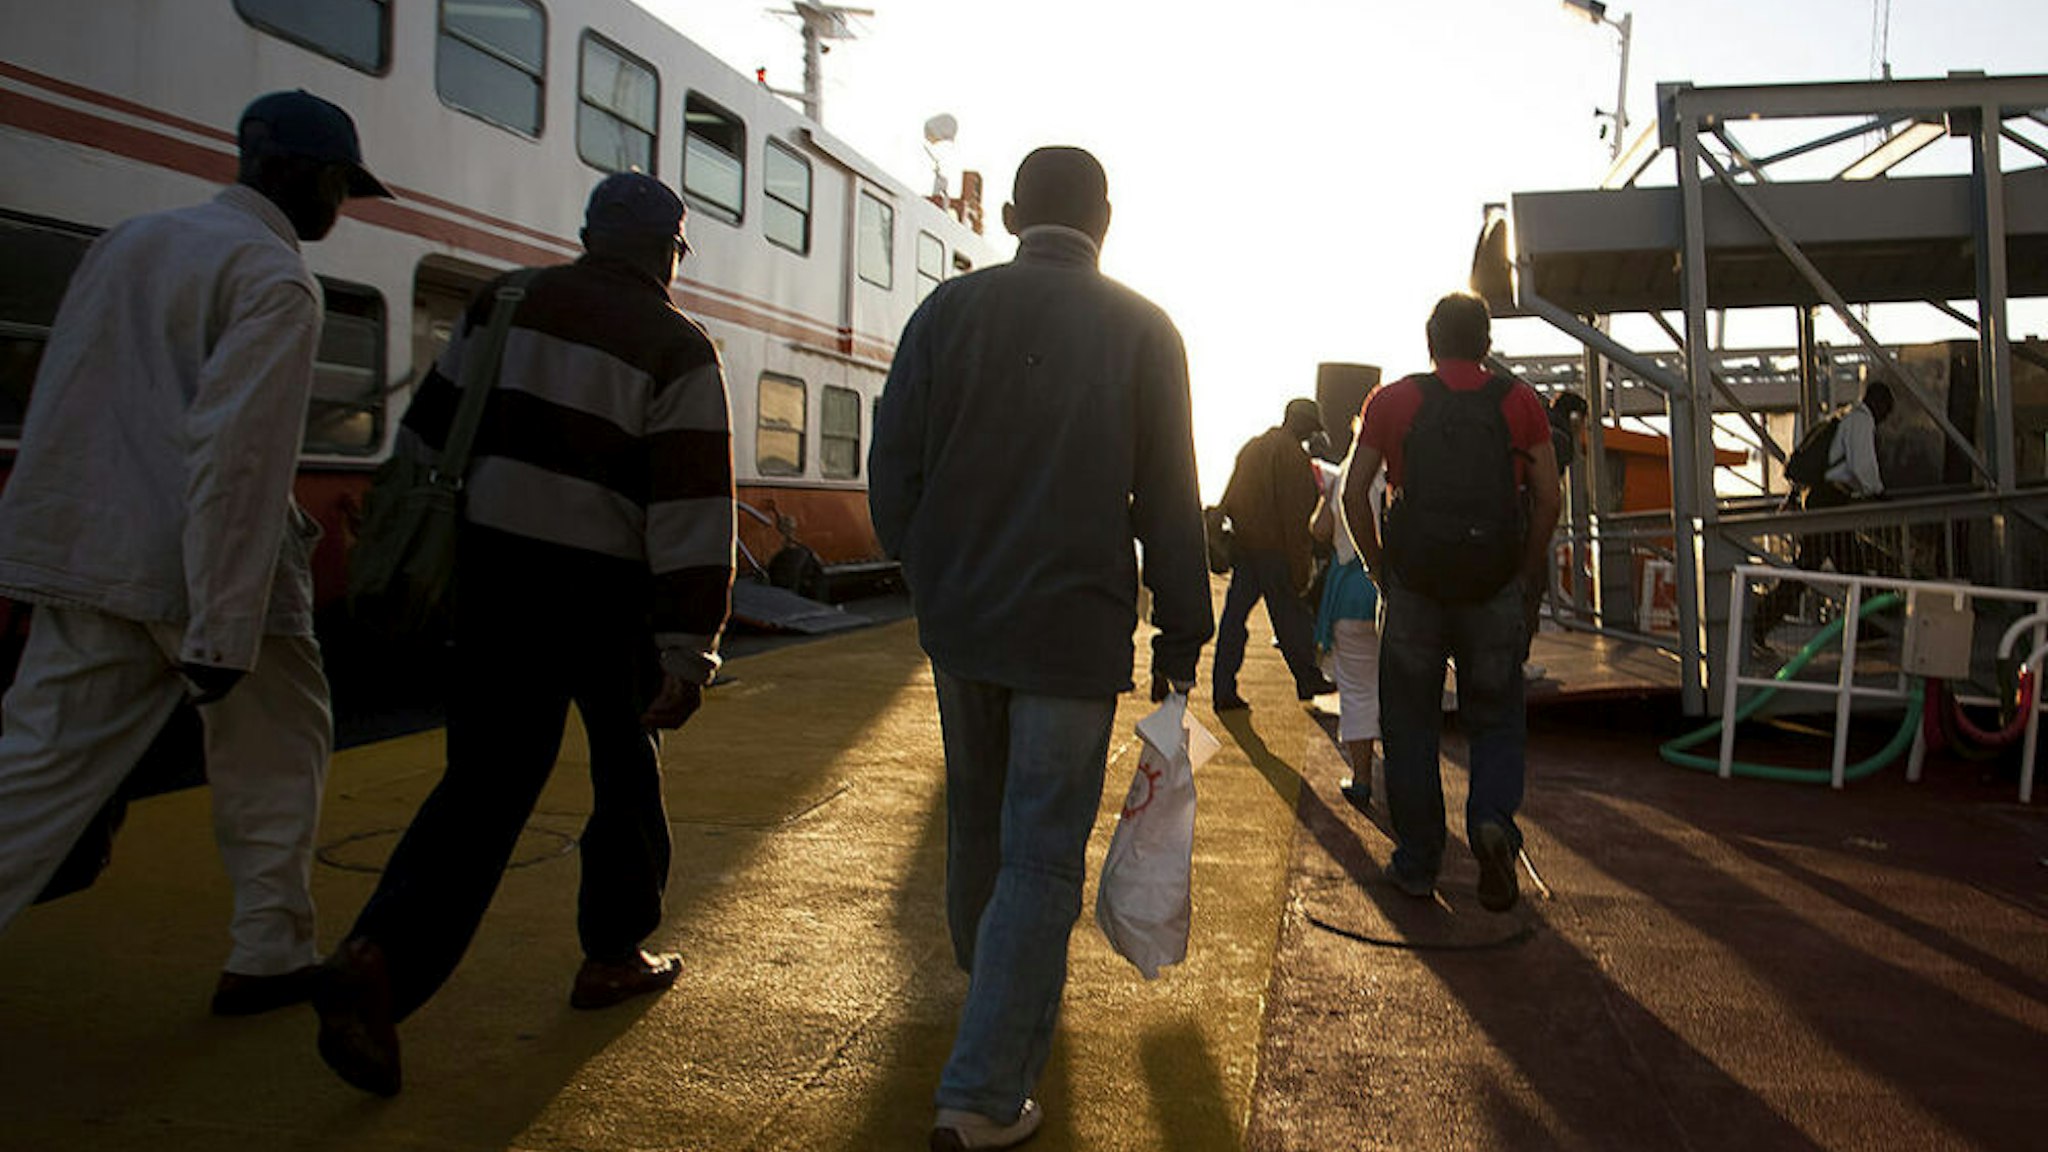 Commuters exit the ferry at Cacilhas station after crossing the river Tejo in Lisbon, Portugal, on Wednesday, June 1, 2011. Portugal's elections may produce a political stalemate that slows implementation of the austerity measures needed to trim the euro-region's fourth-biggest debt and tap 78 billion euros ($109 billion) of bailout funds.